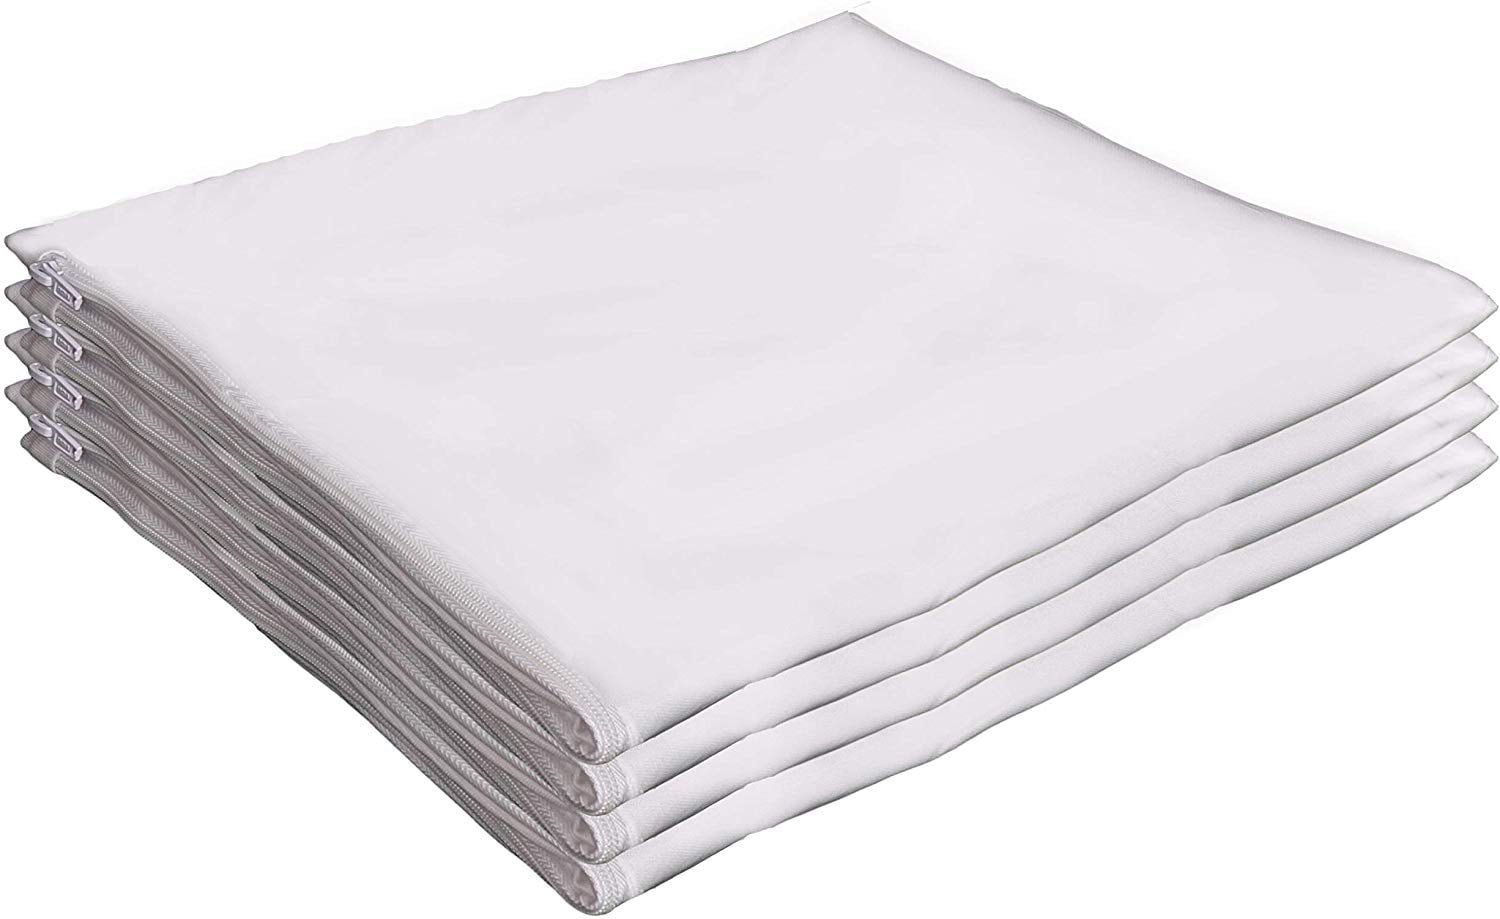 Details about   Waterproof Terry Towel Zipped Pillow Protectors 100% Microfibre Pack of 2,4,6,8 